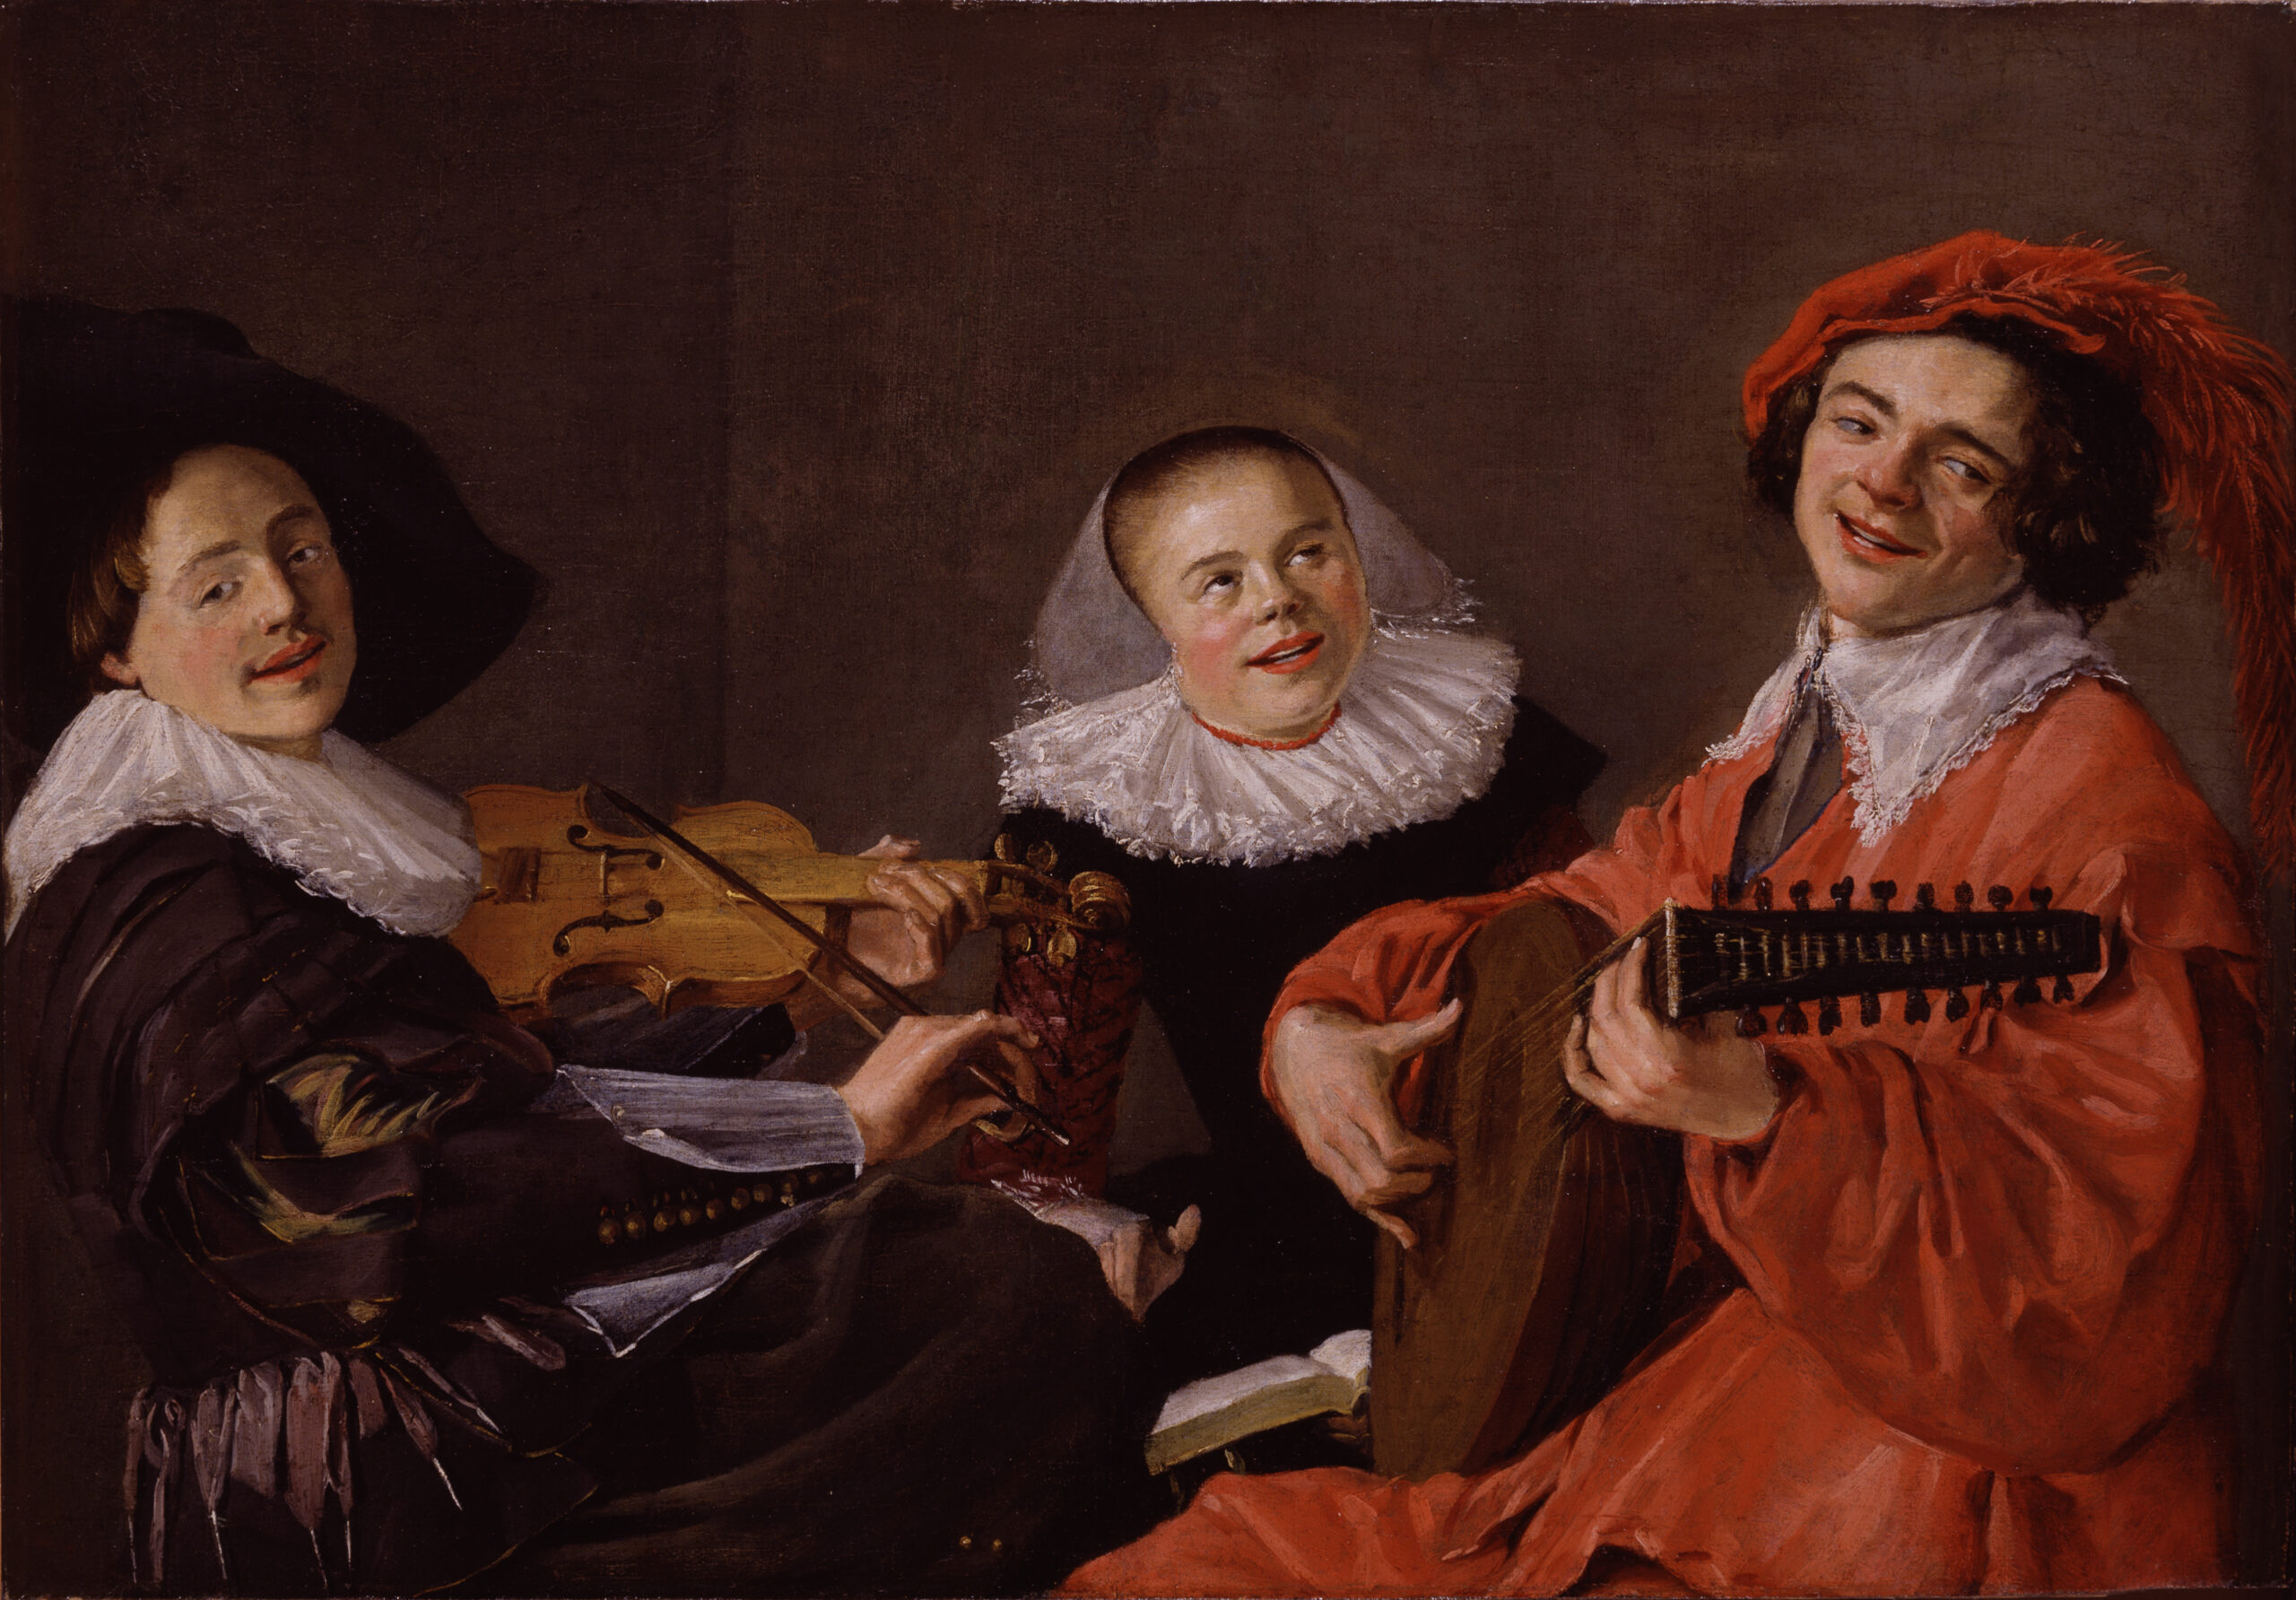 Judith Leyster, The Concert, 1631, oil on canvas, National Museum of Women in the Arts, Washington D.C.